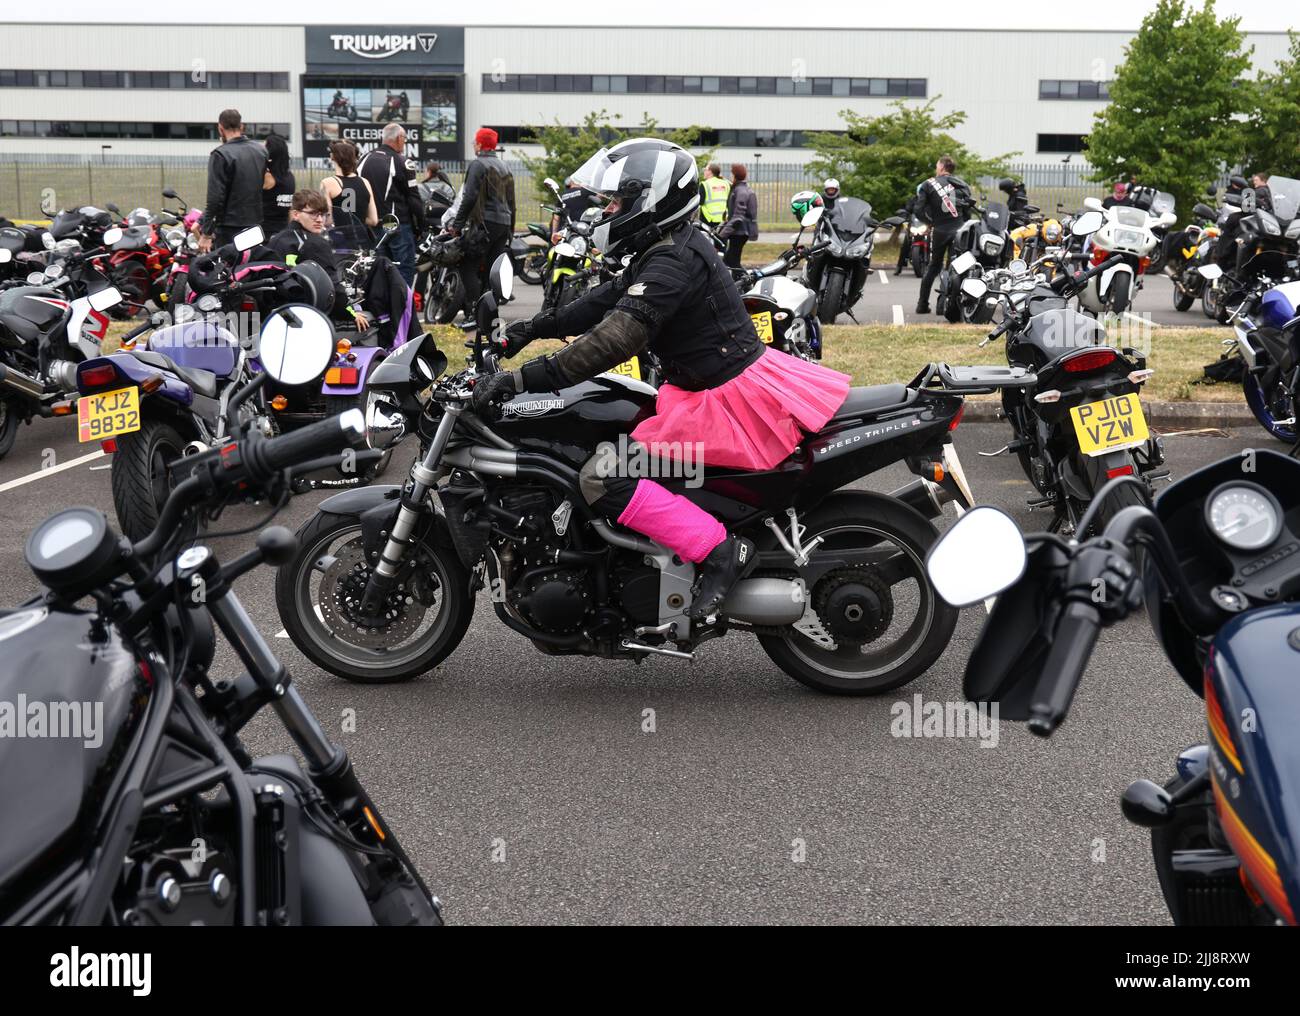 Hinckley, Leicestershire, UK. 24th July 2022. A woman dressed in a pink tutu rides between motorcycles during a World Record attempt for the largest Female biker meet at the global headquarters for Triumph Motorcycles. Credit Darren Staples/Alamy Live News. Stock Photo